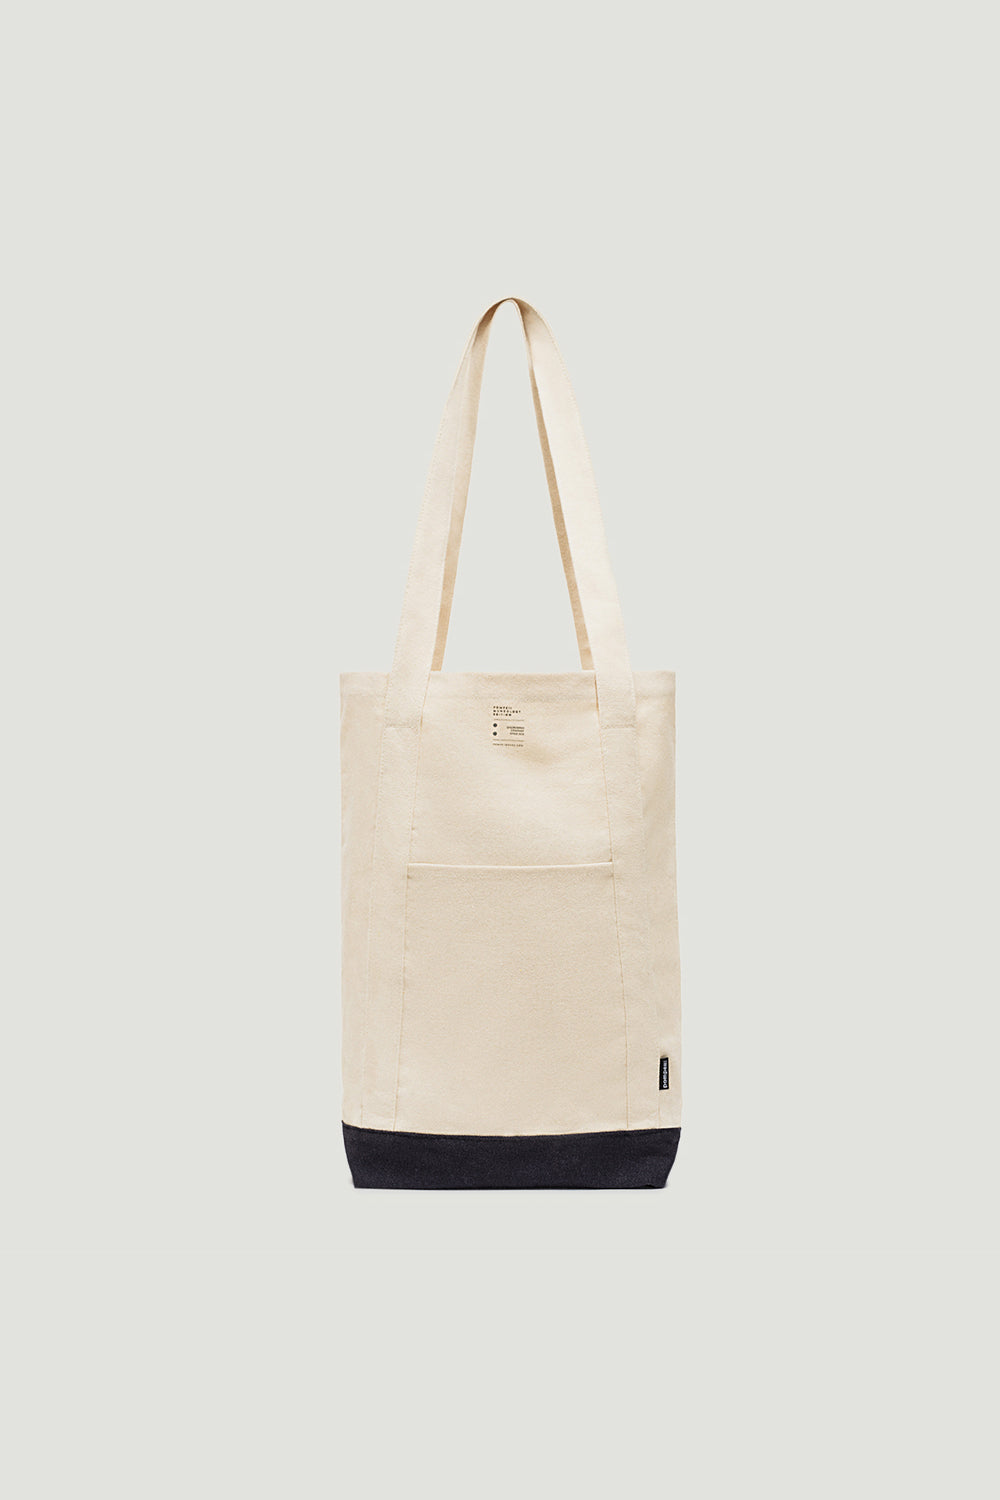 THE TOTE BAG CRUDE NAVY